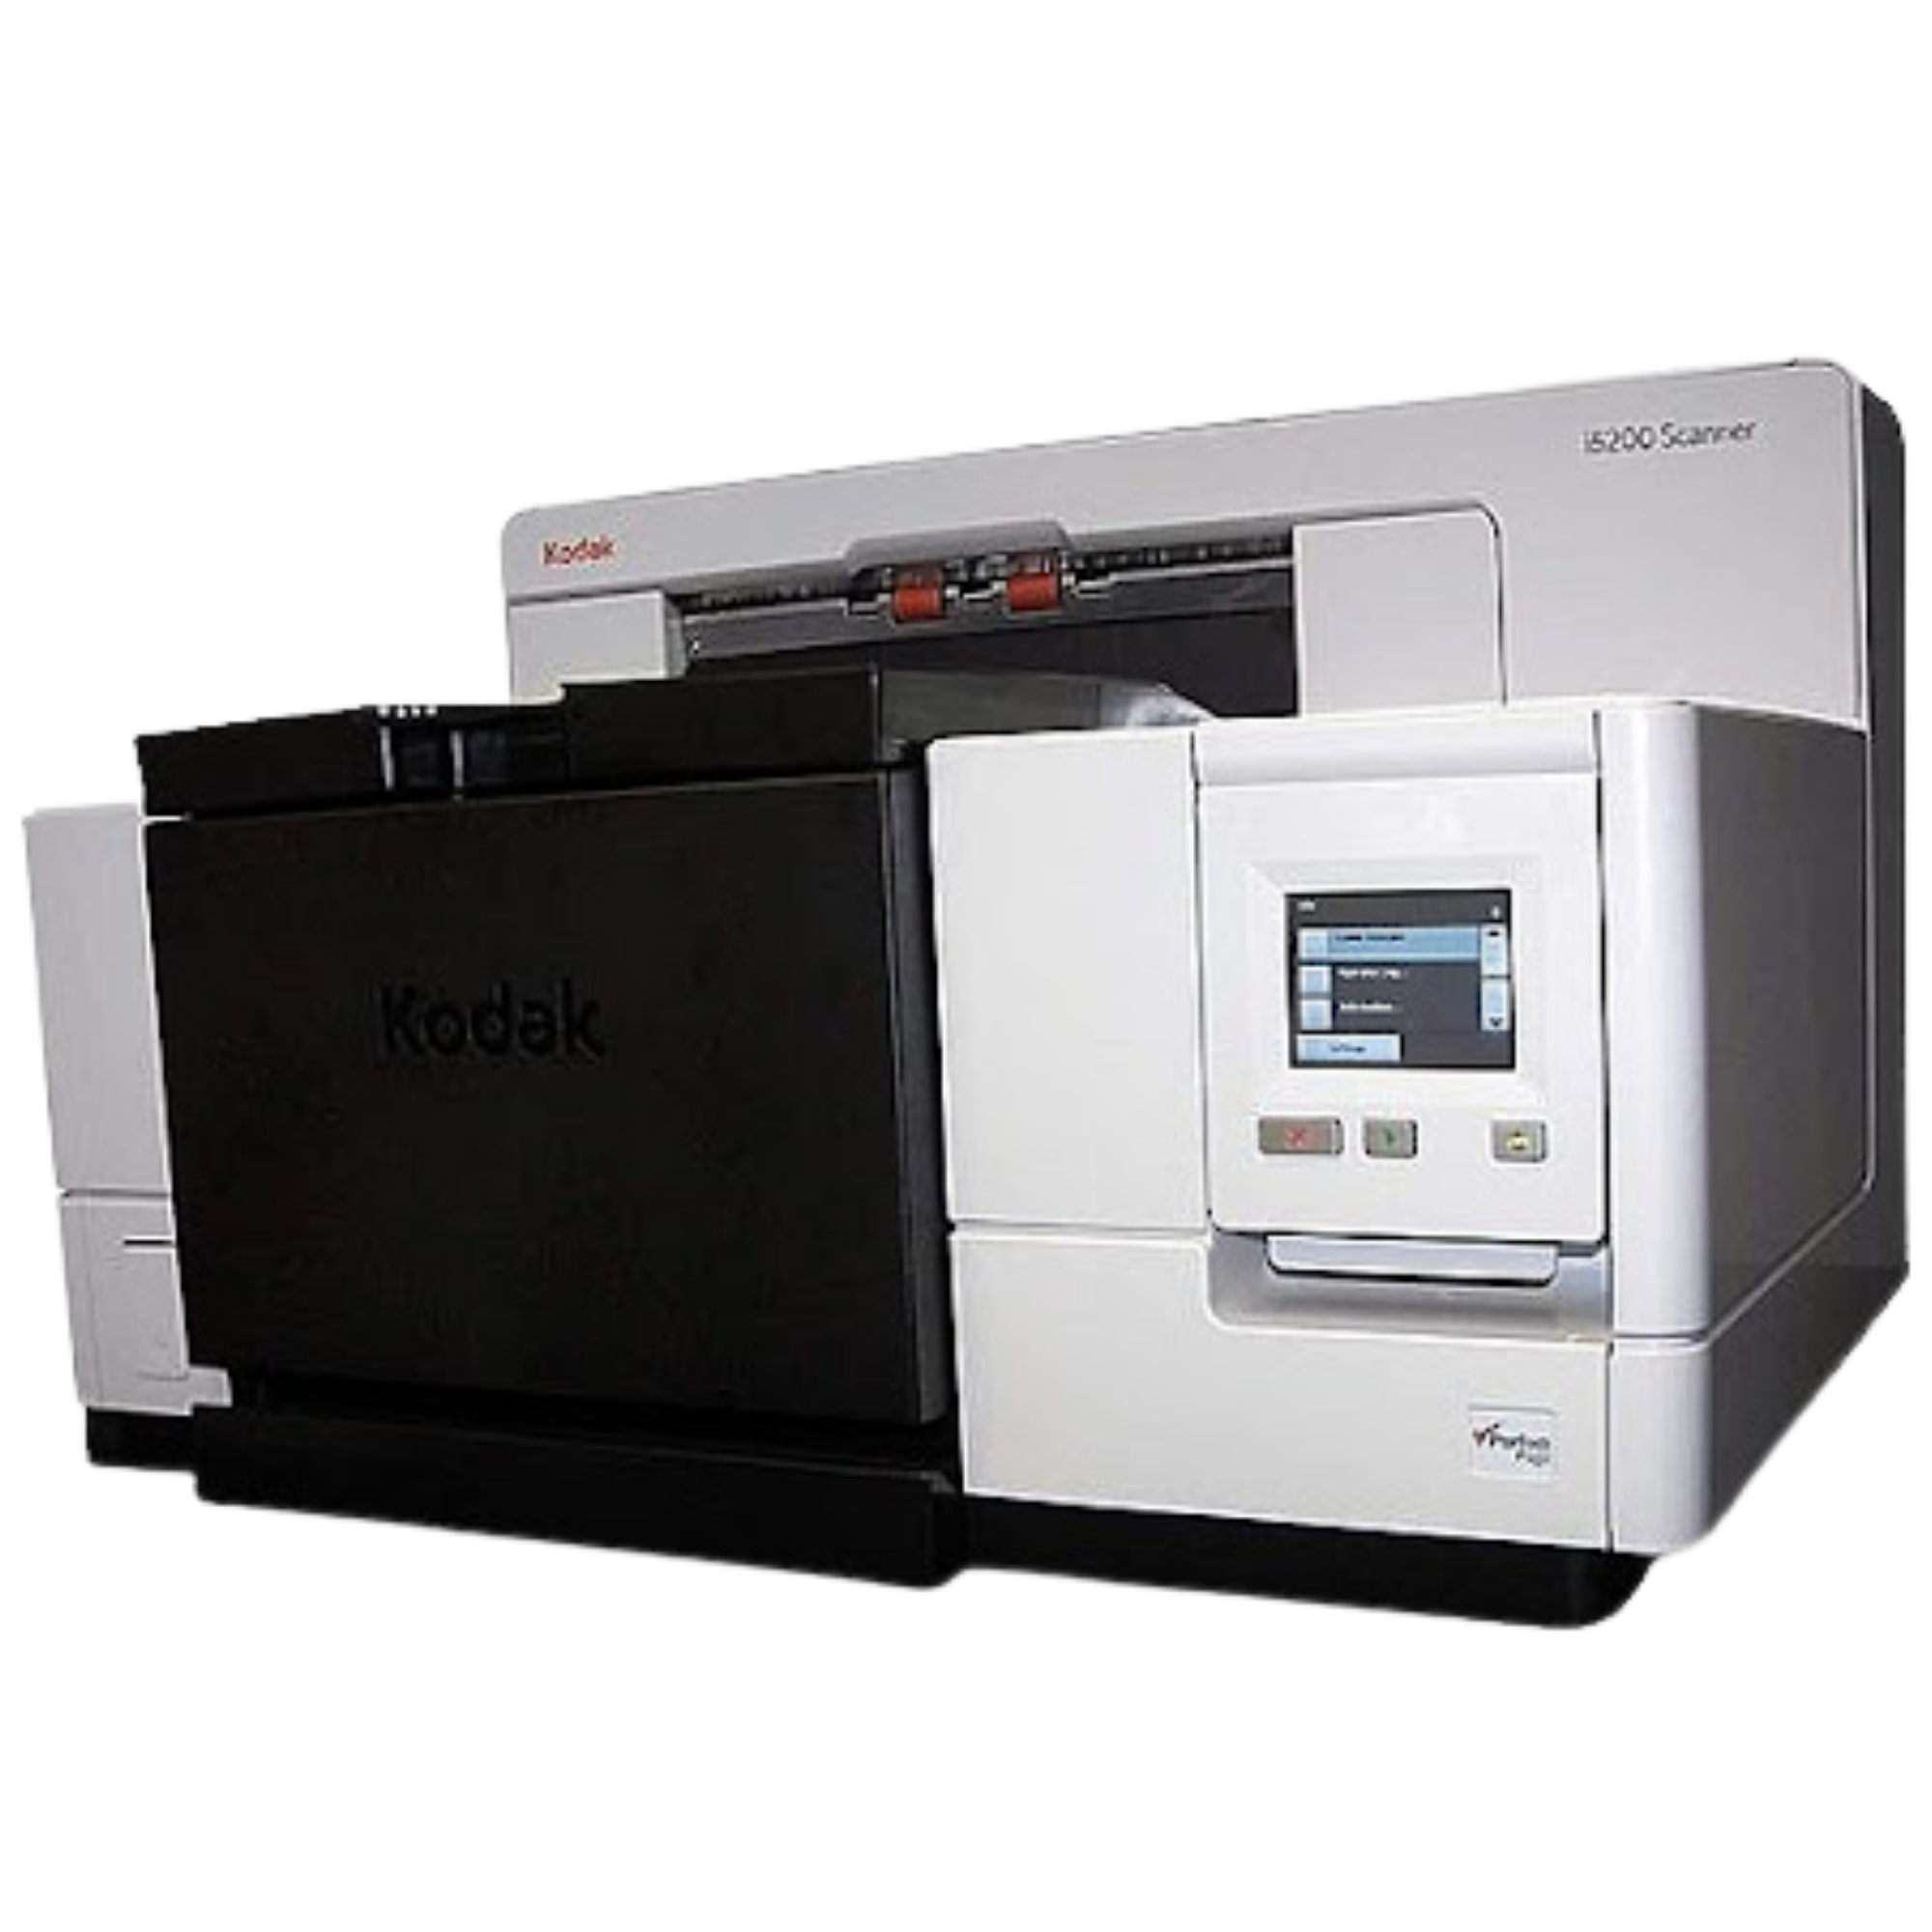 Kodak Production Scanners from the document imaging experts